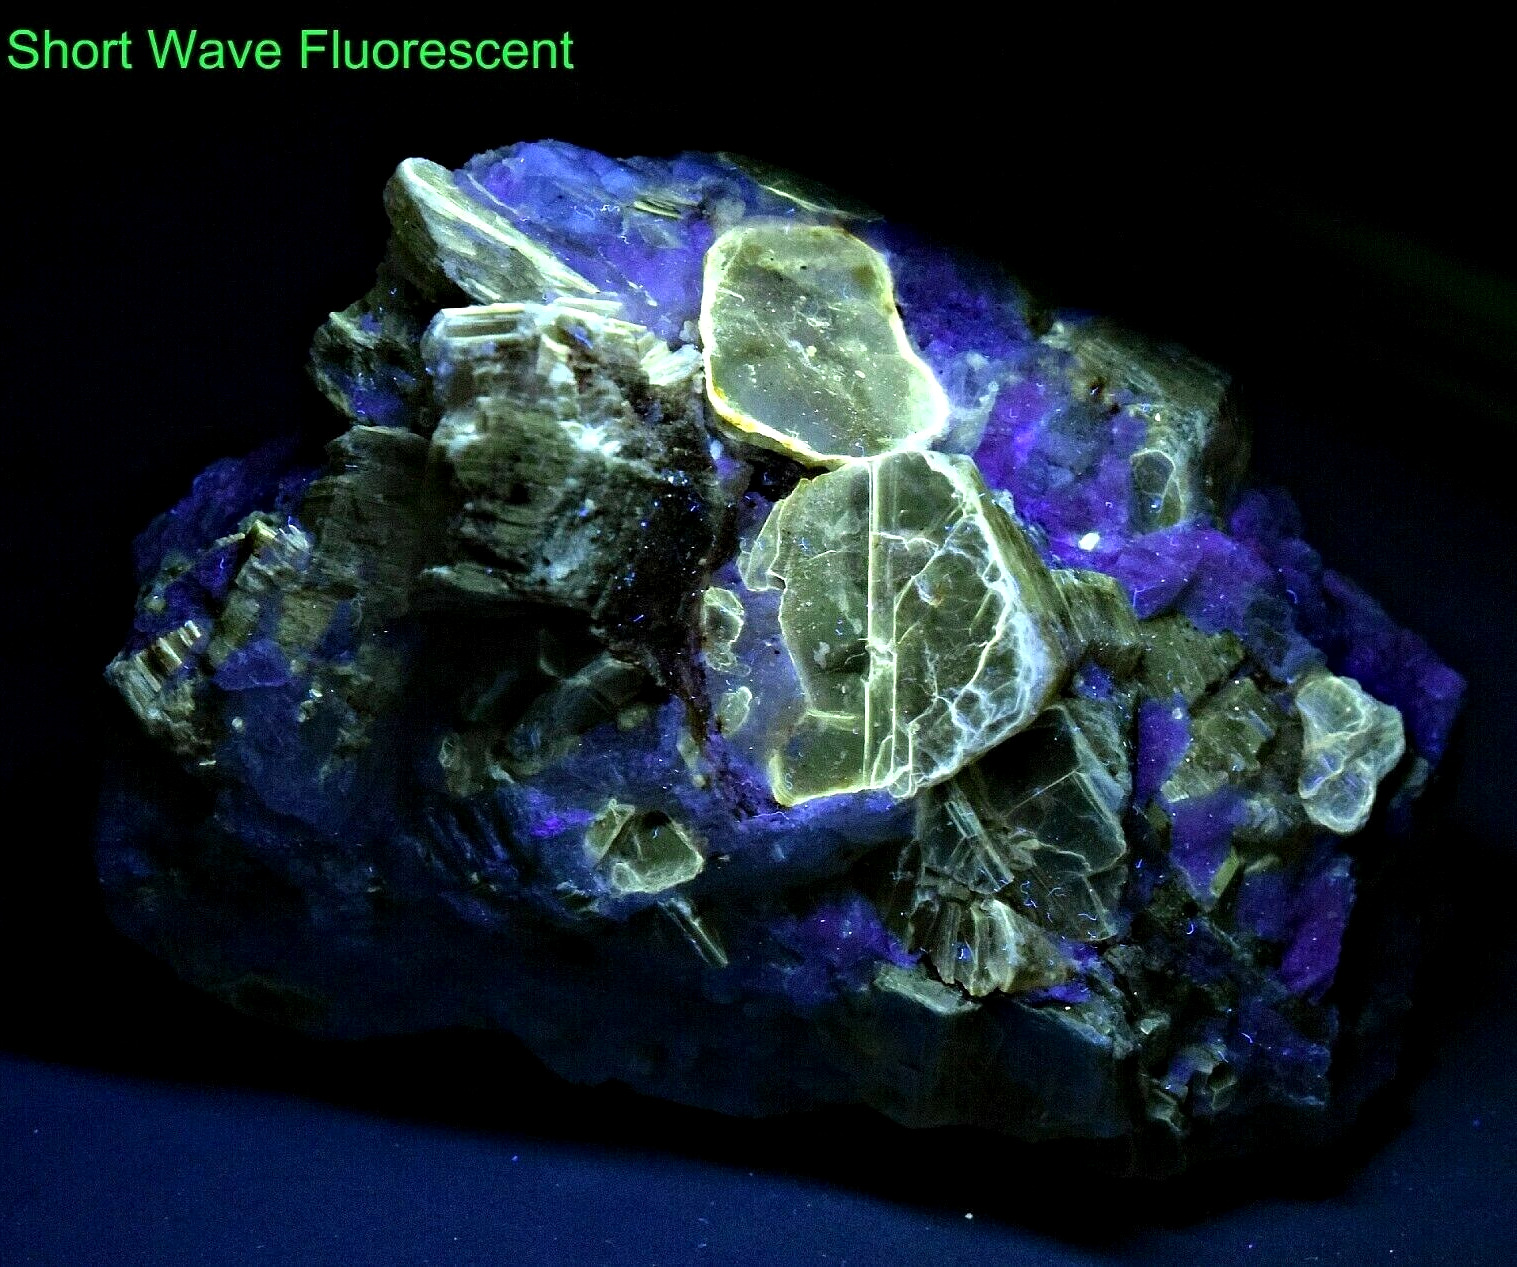 355g Natural Fluorescent Phlogopite Crystals On Matrix from Afghanistan